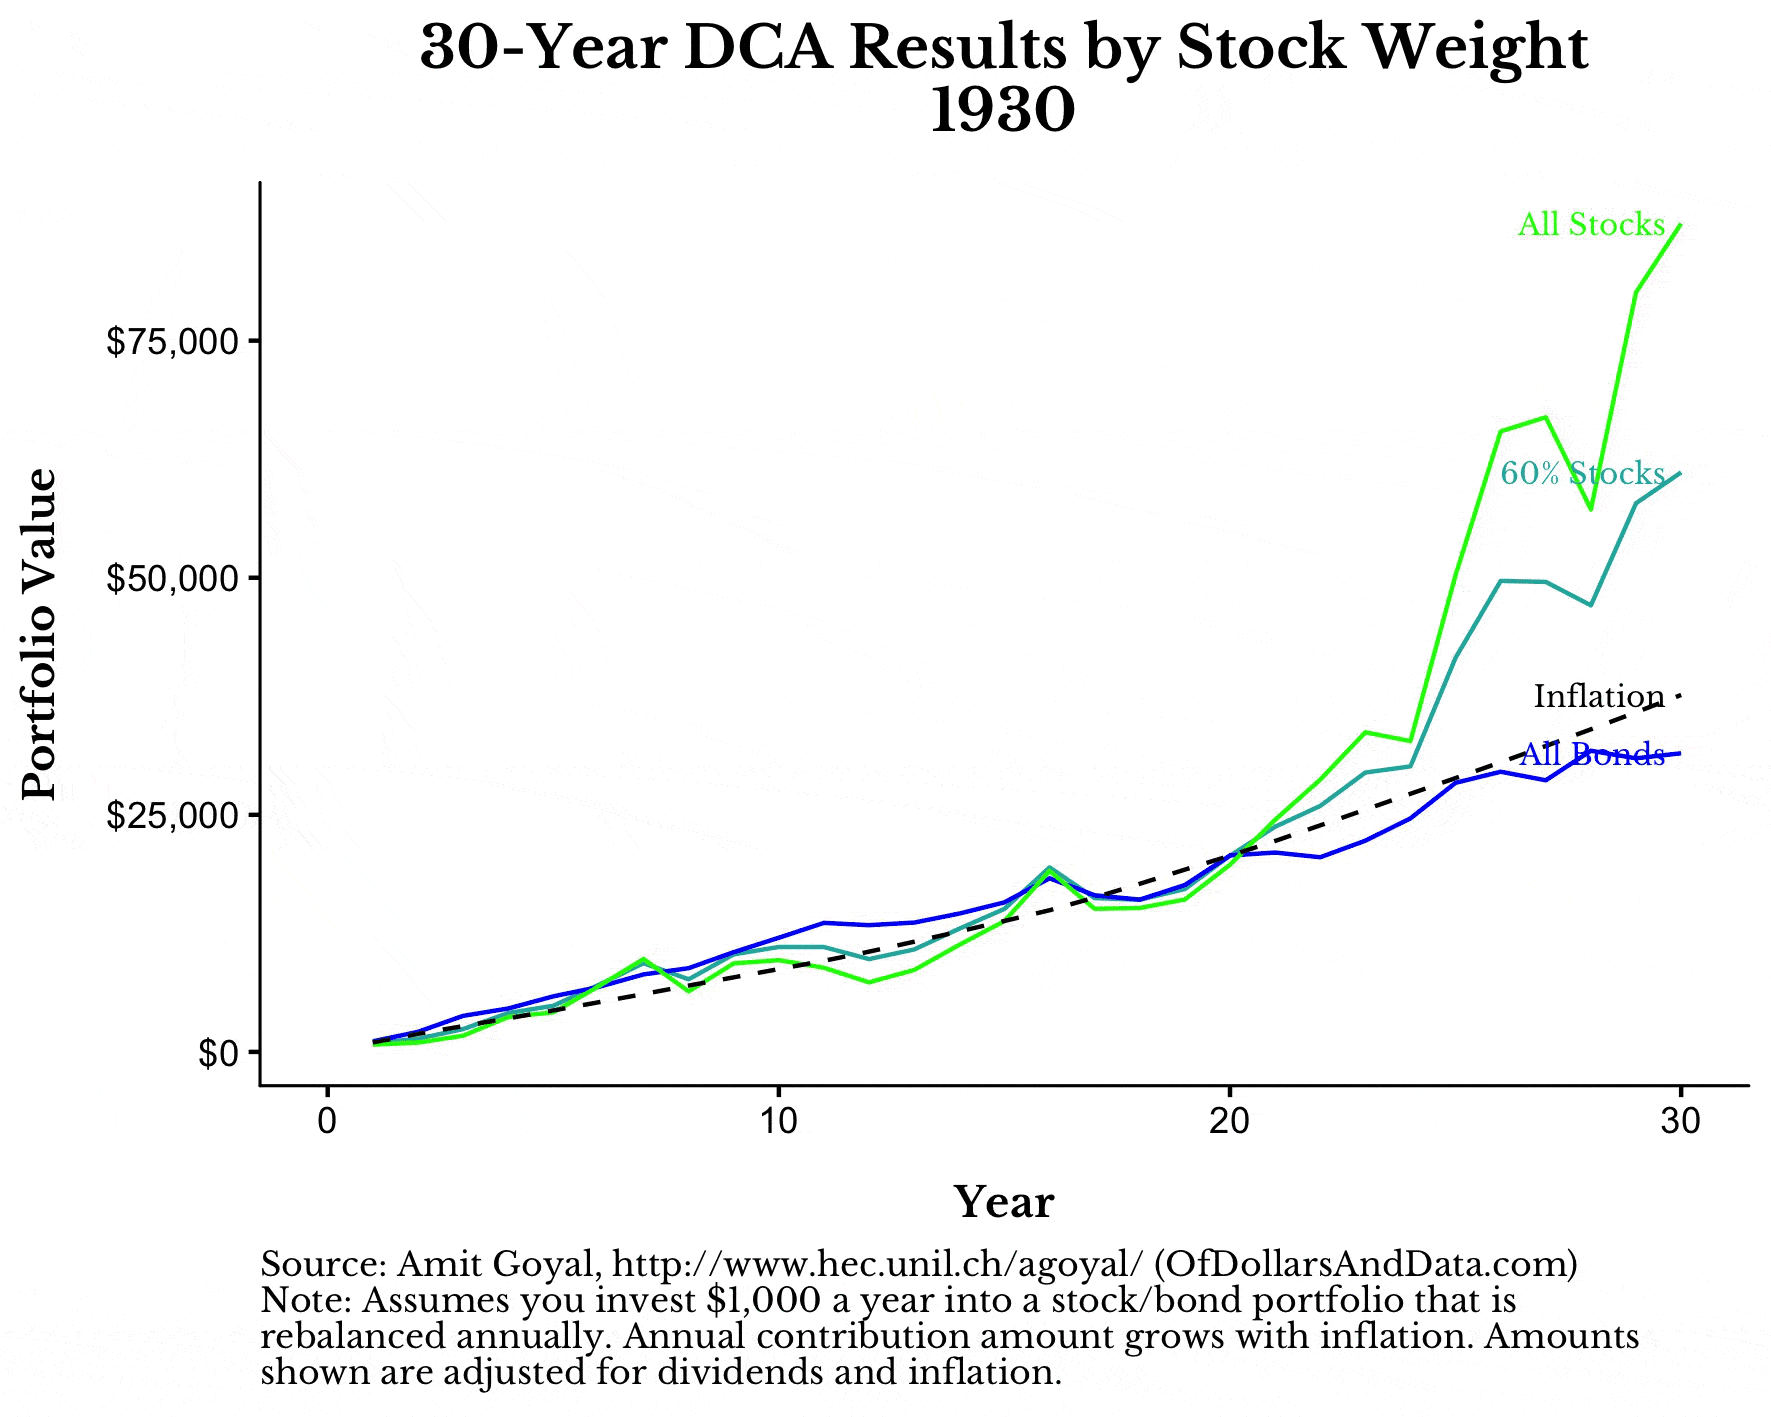 GIF of 30-year DCA result by stock weight for different portfolios of US stocks and bonds for 1935-1985